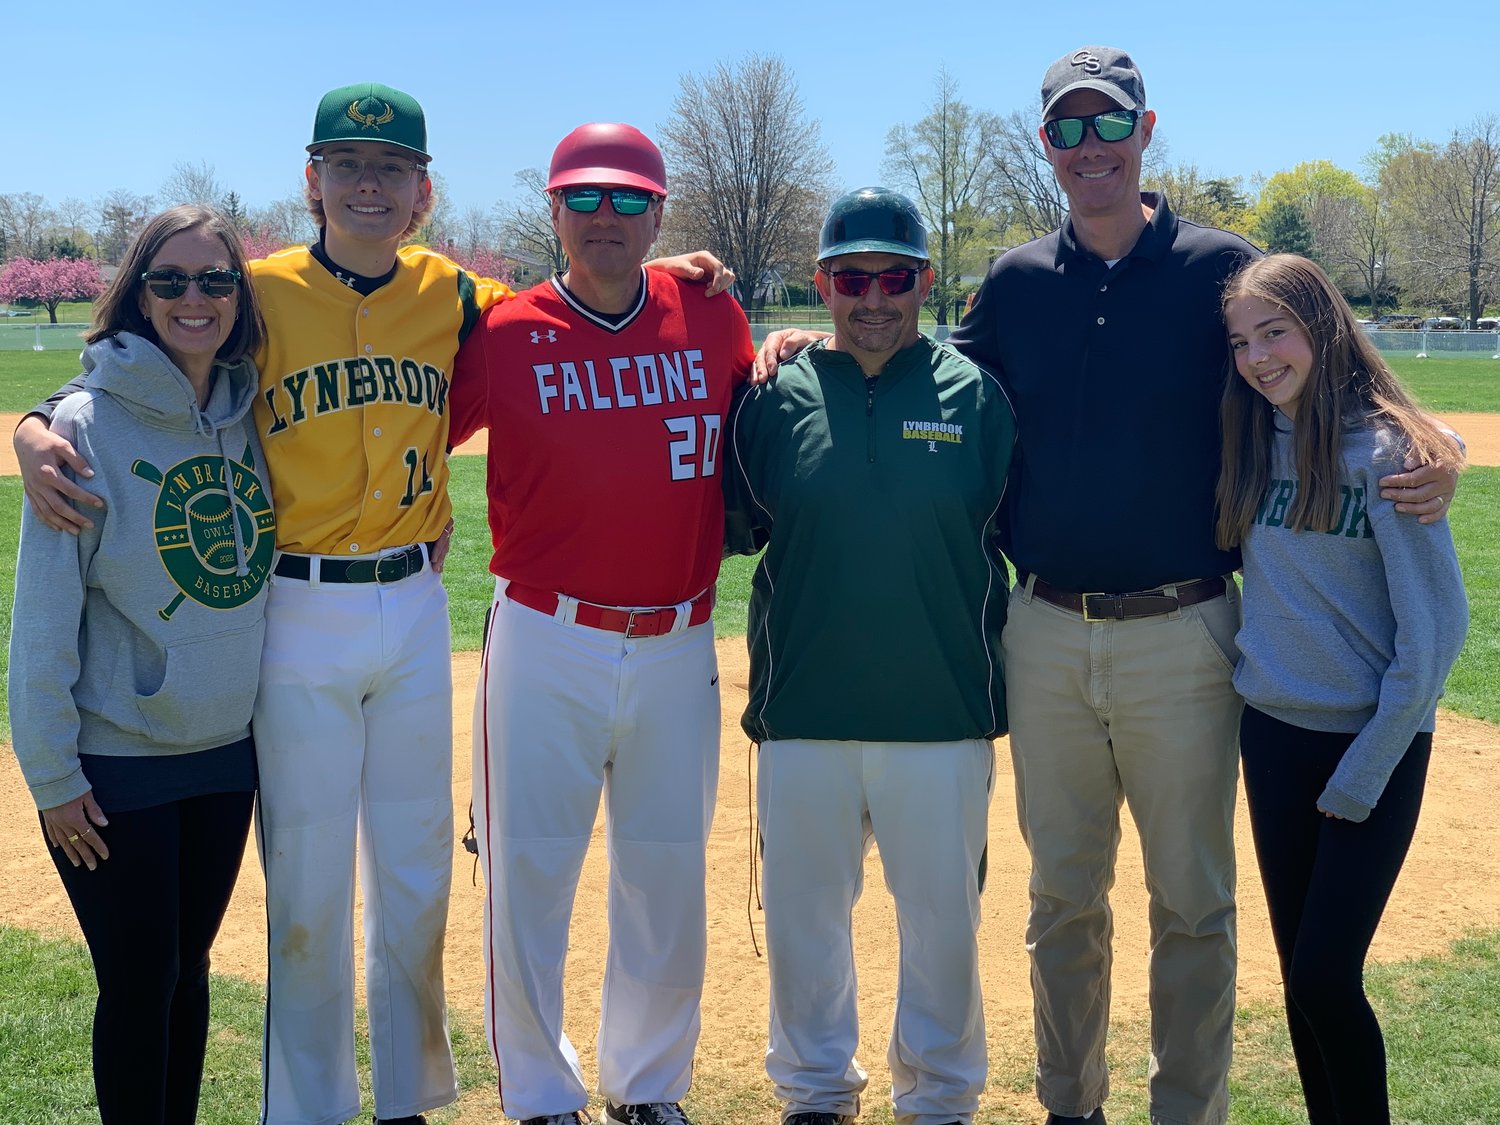 Taking part in the field dedication to late former Lynbrook coach Don Roth were, from left, his daughter, Jane Roth Sloan; his grandson Parker Sloan; his friend Rich Hess; Lynbrook baseball coach Al Marrazzo; Roth’s son, Tim; and his granddaughter Kelsey Roth.